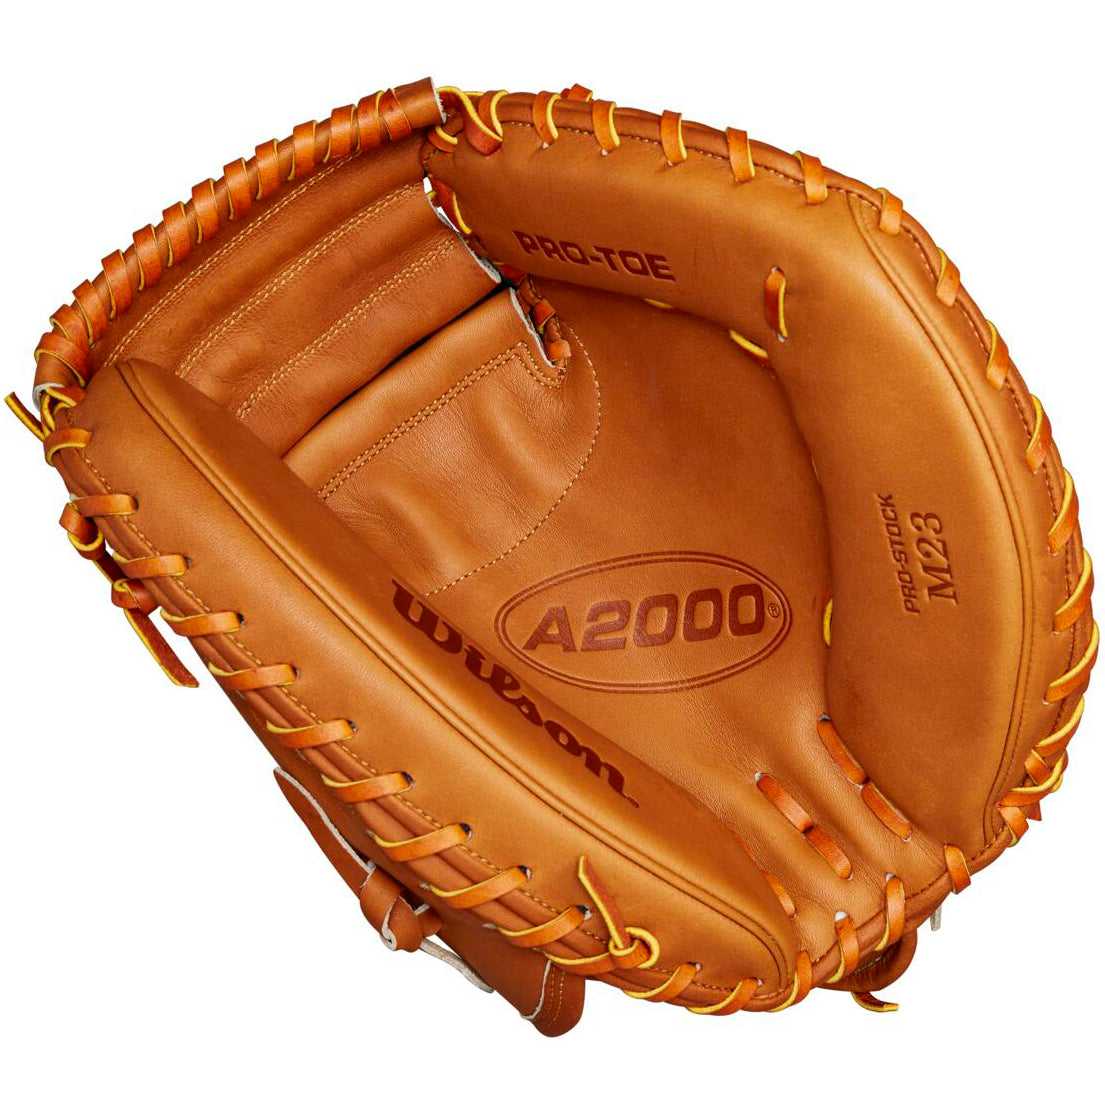 Wilson A2000 M23 33.50" Glove Day Series Catcher's Mitt WBW102094335 - Saddle Tan - HIT a Double